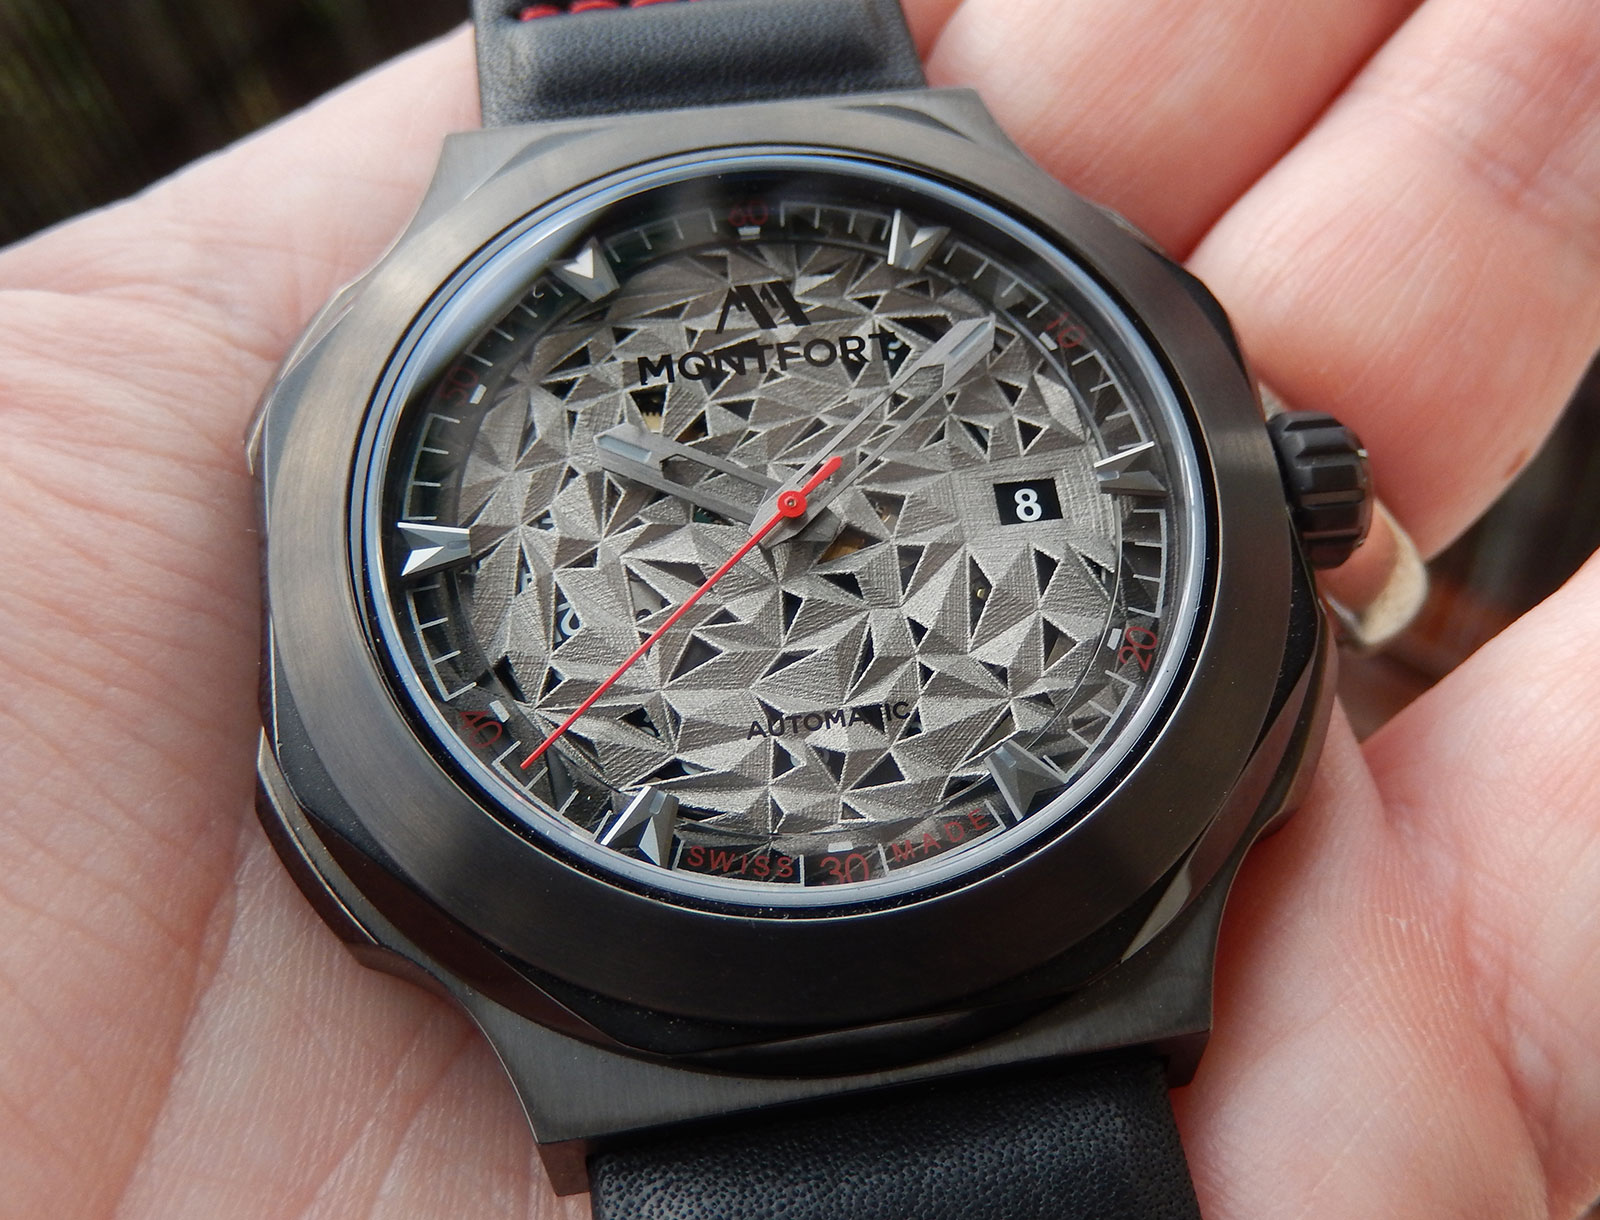 Montfront Strata watch 3D printed dial 1